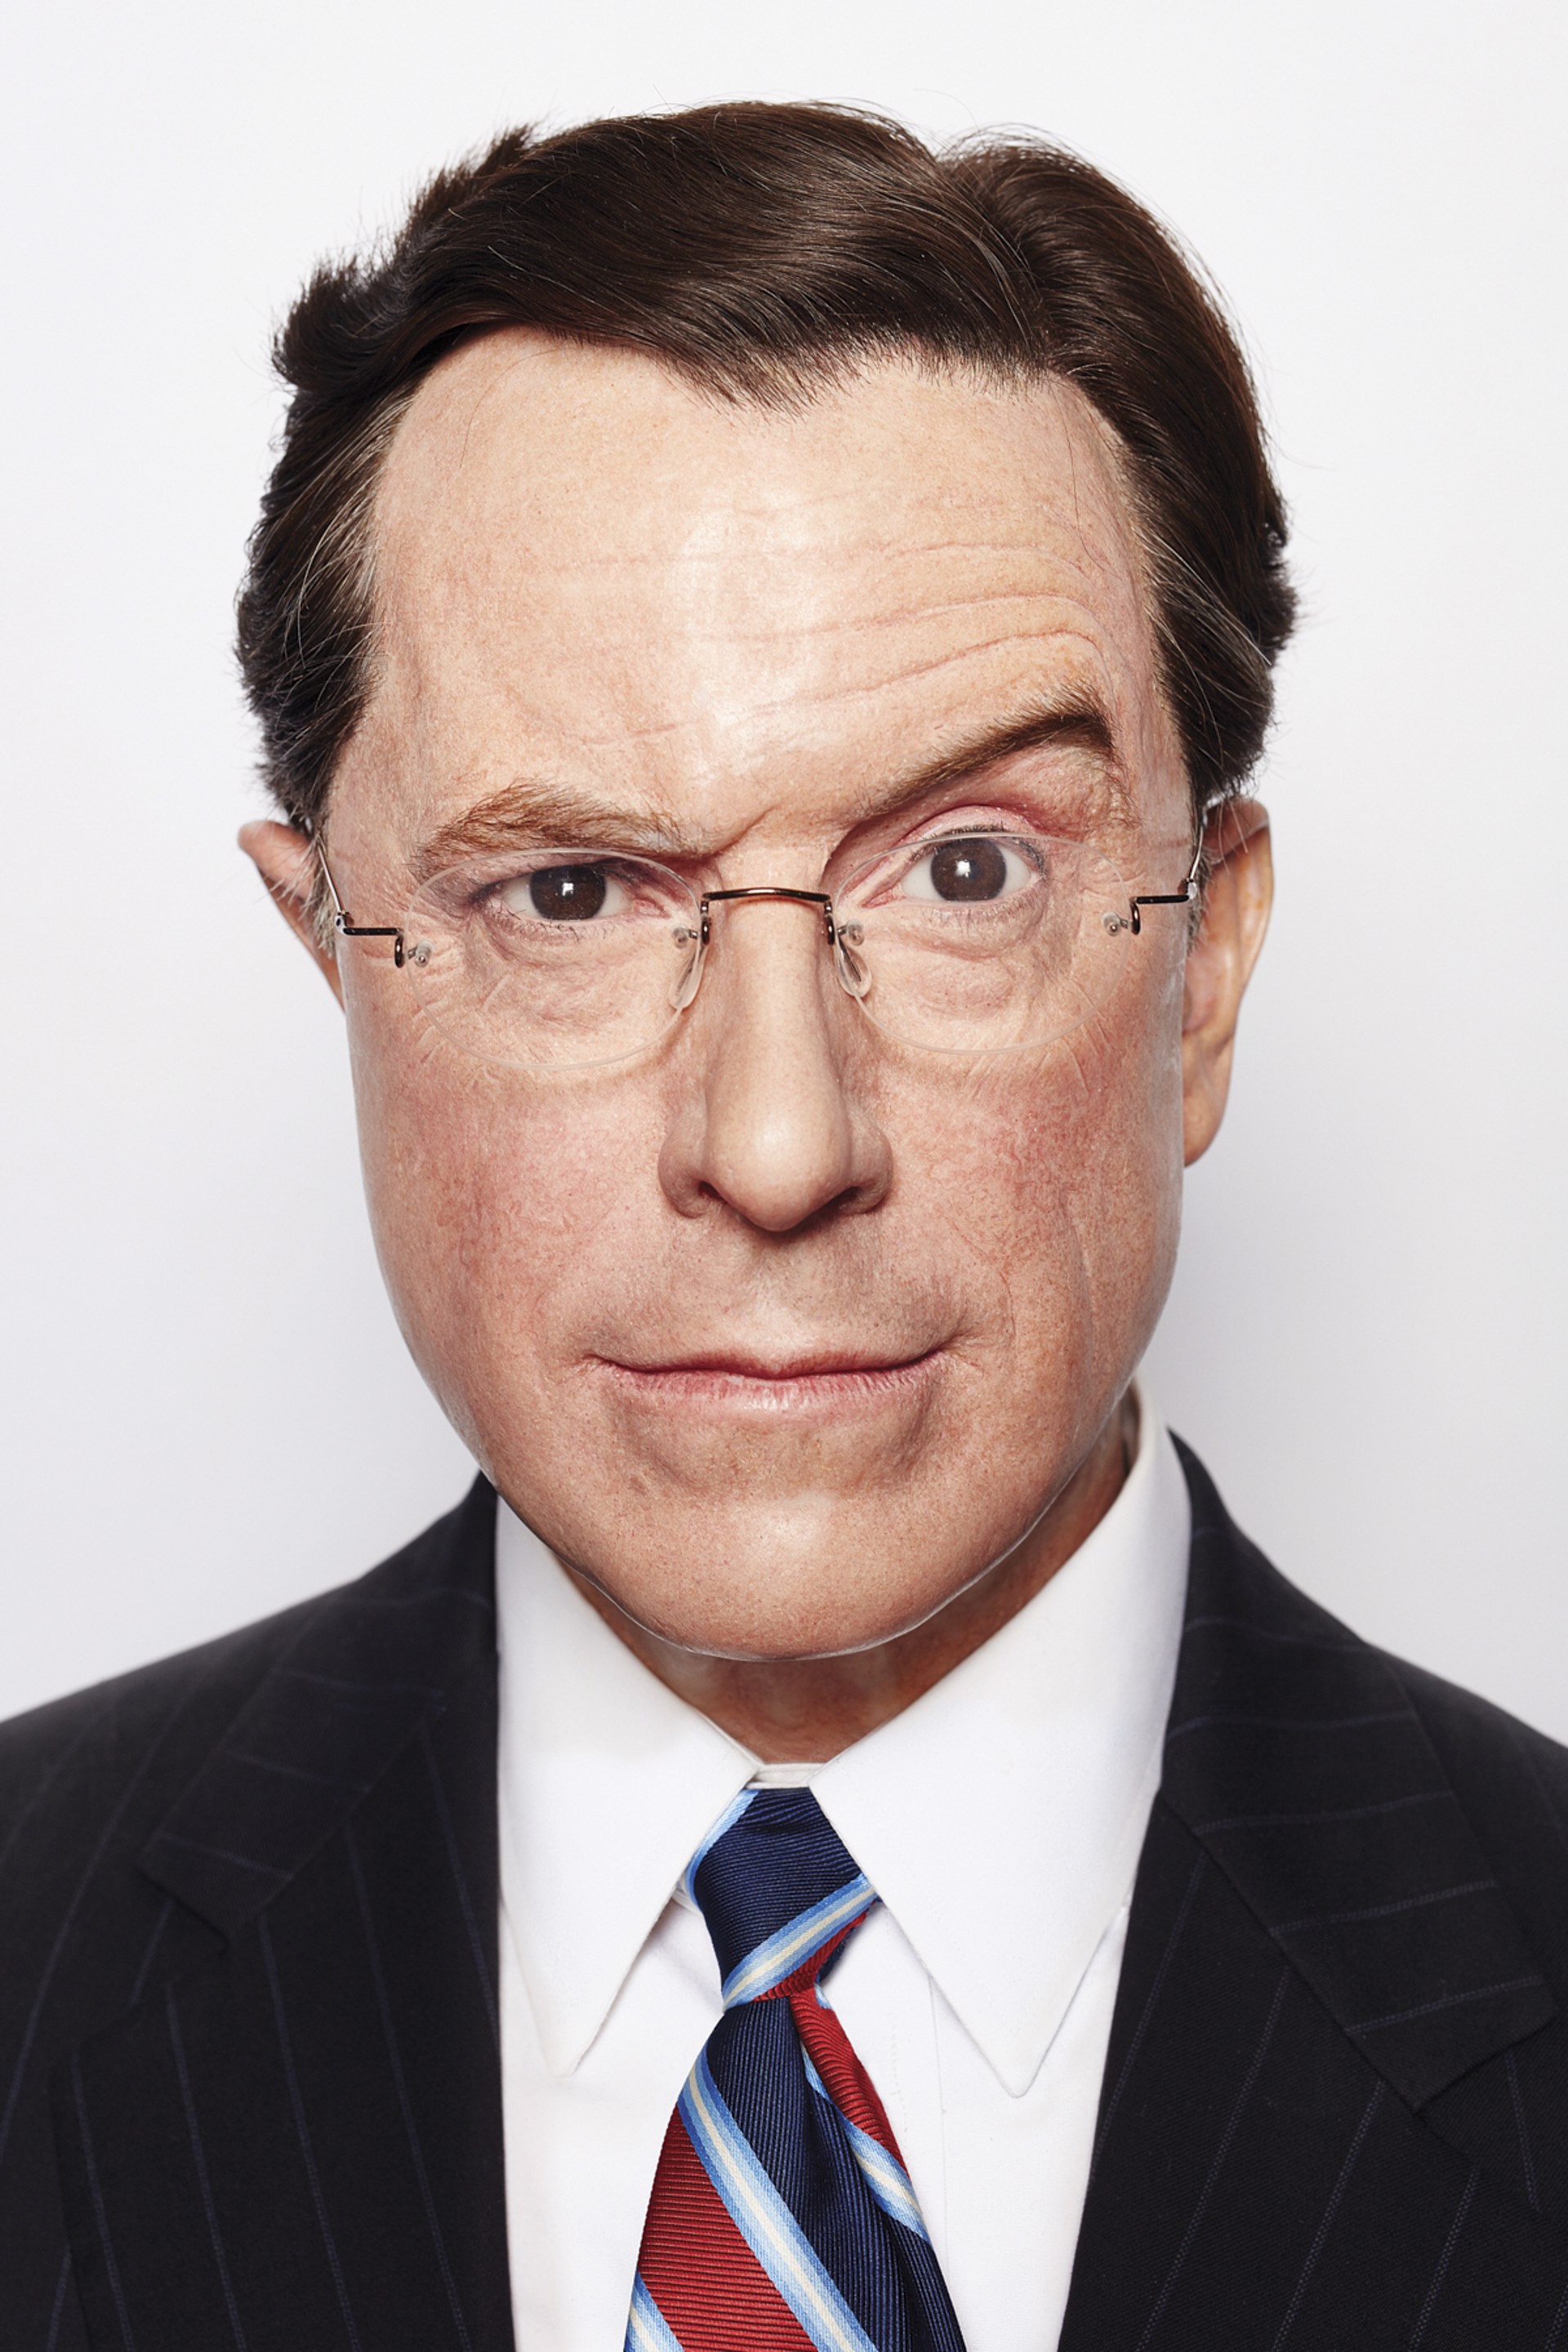 This is not Stephen Colbert by Peter Andrew Lusztyk | Uncanny Valley